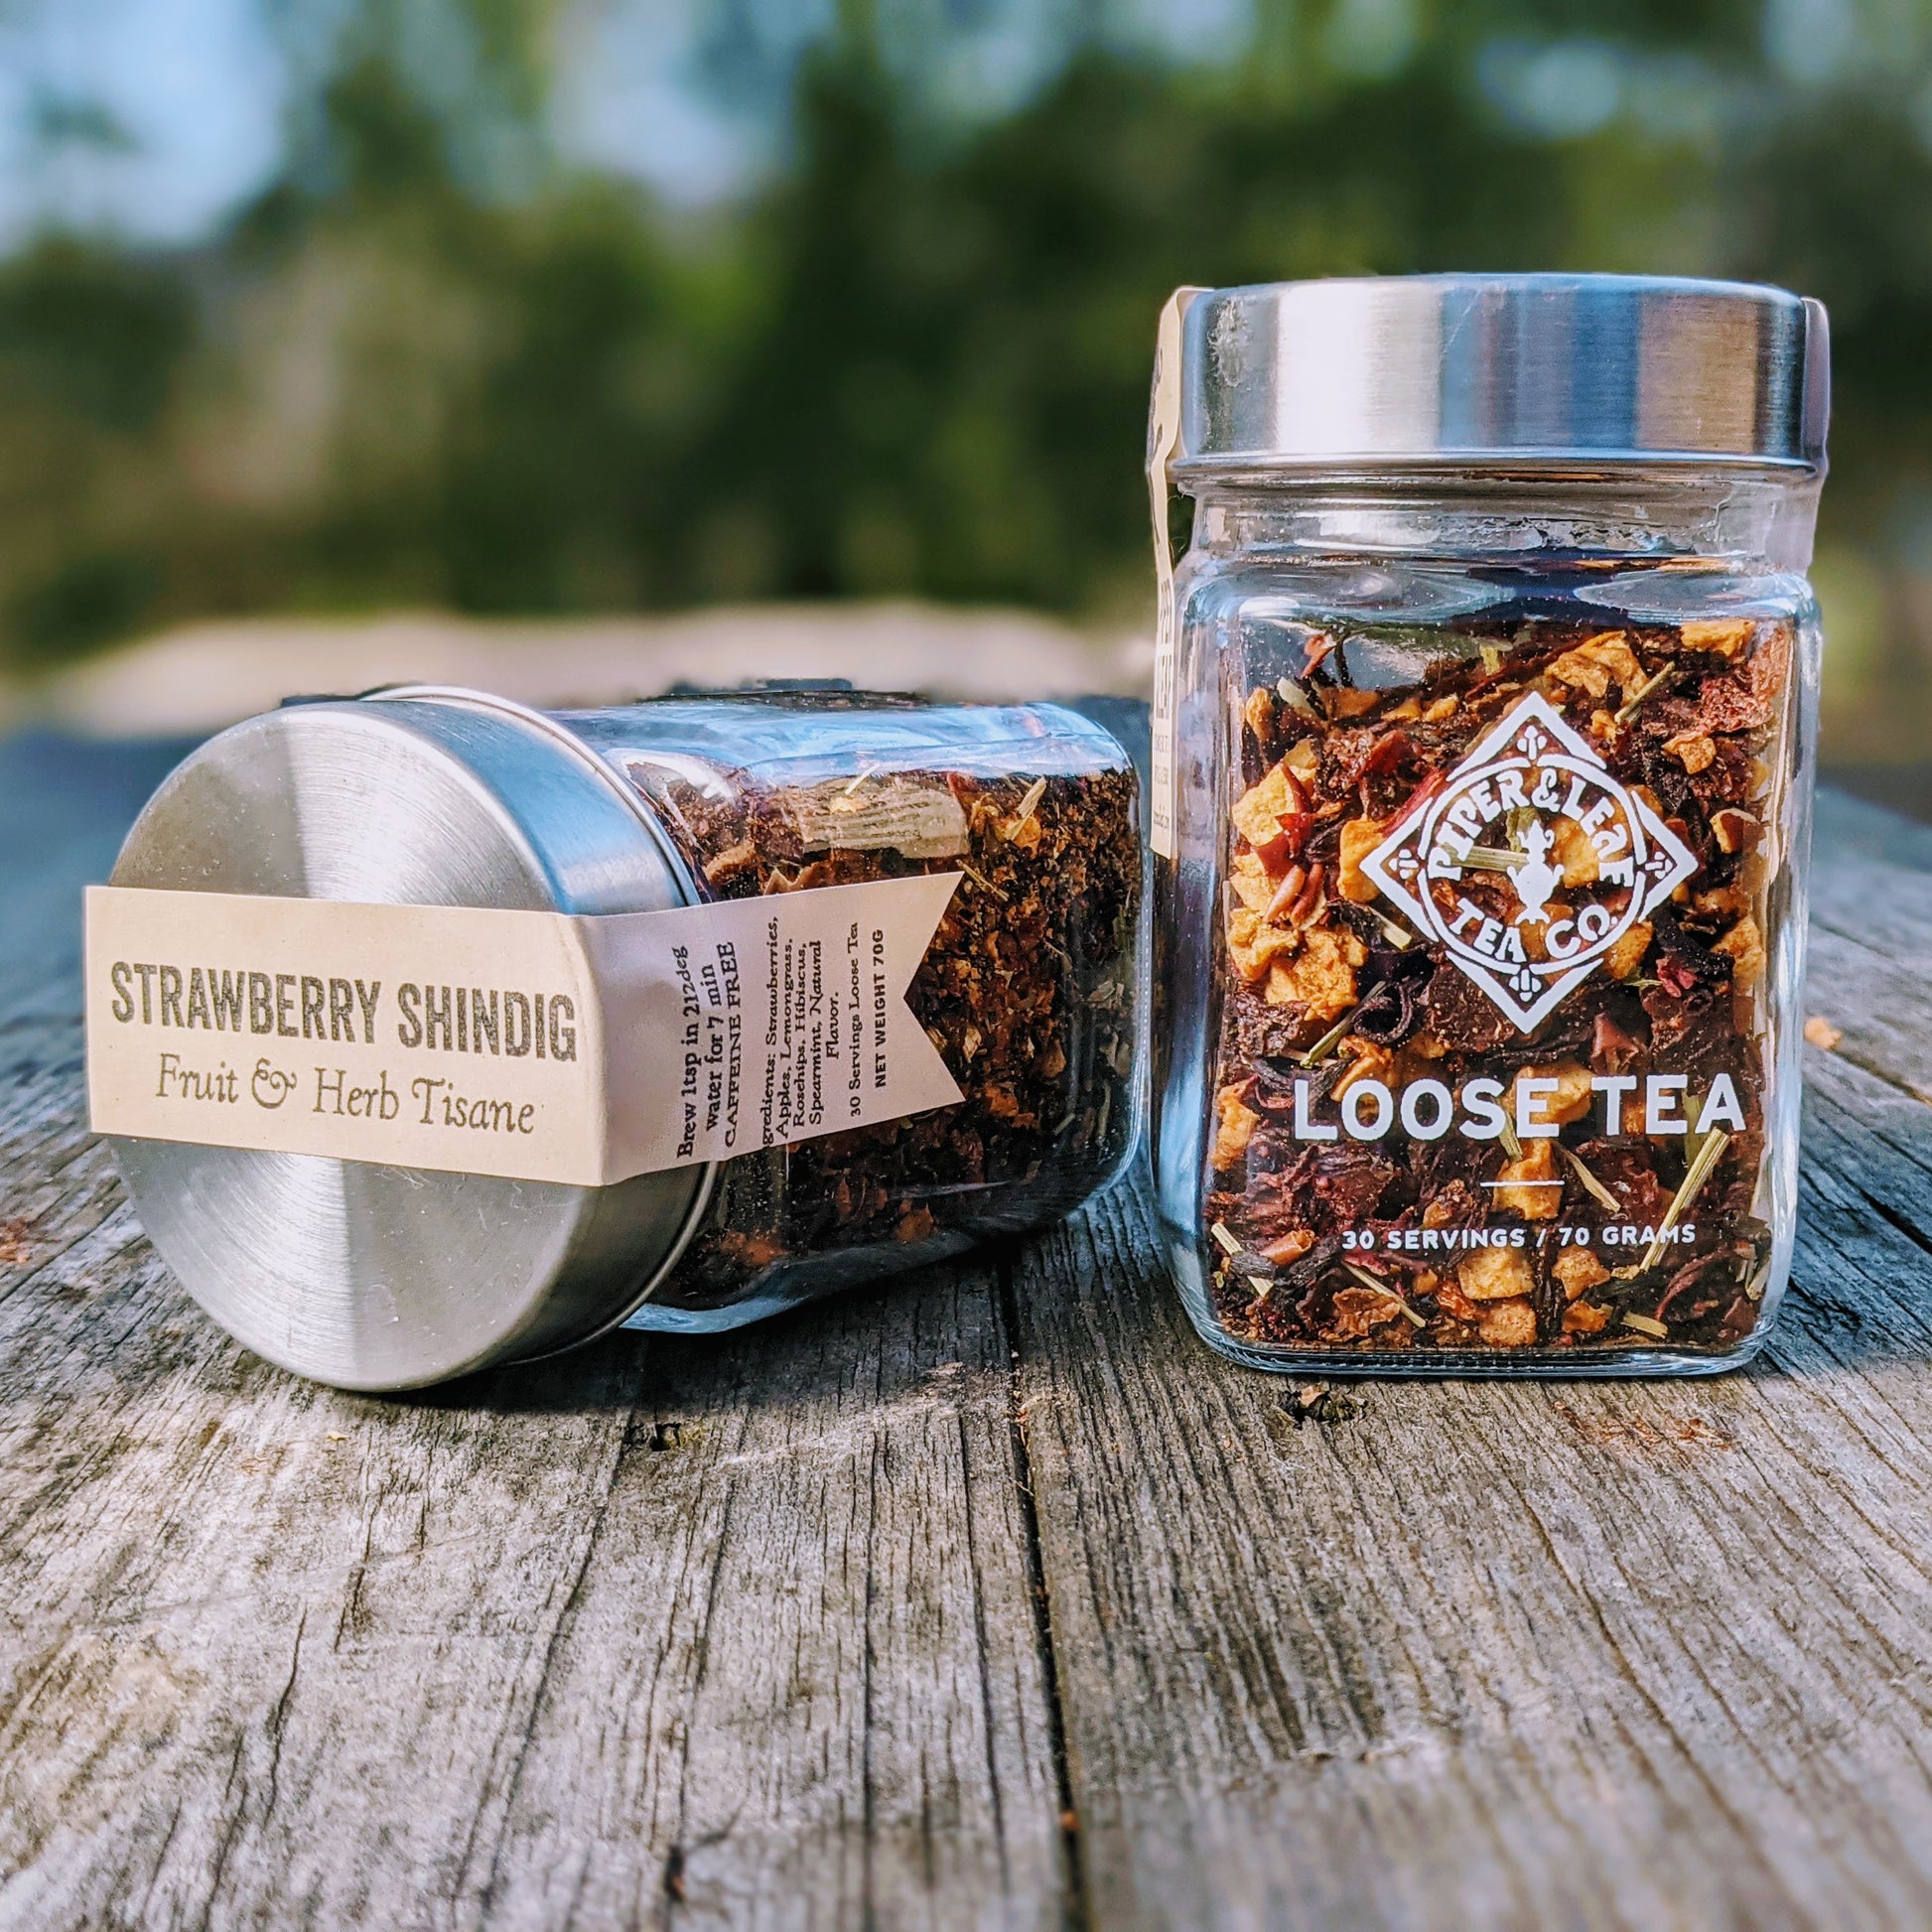 A jar of Strawberry Shindig Glass Jar of Loose Leaf Tea - 30 Servings by Piper & Leaf Tea Co. sitting on a wooden table.